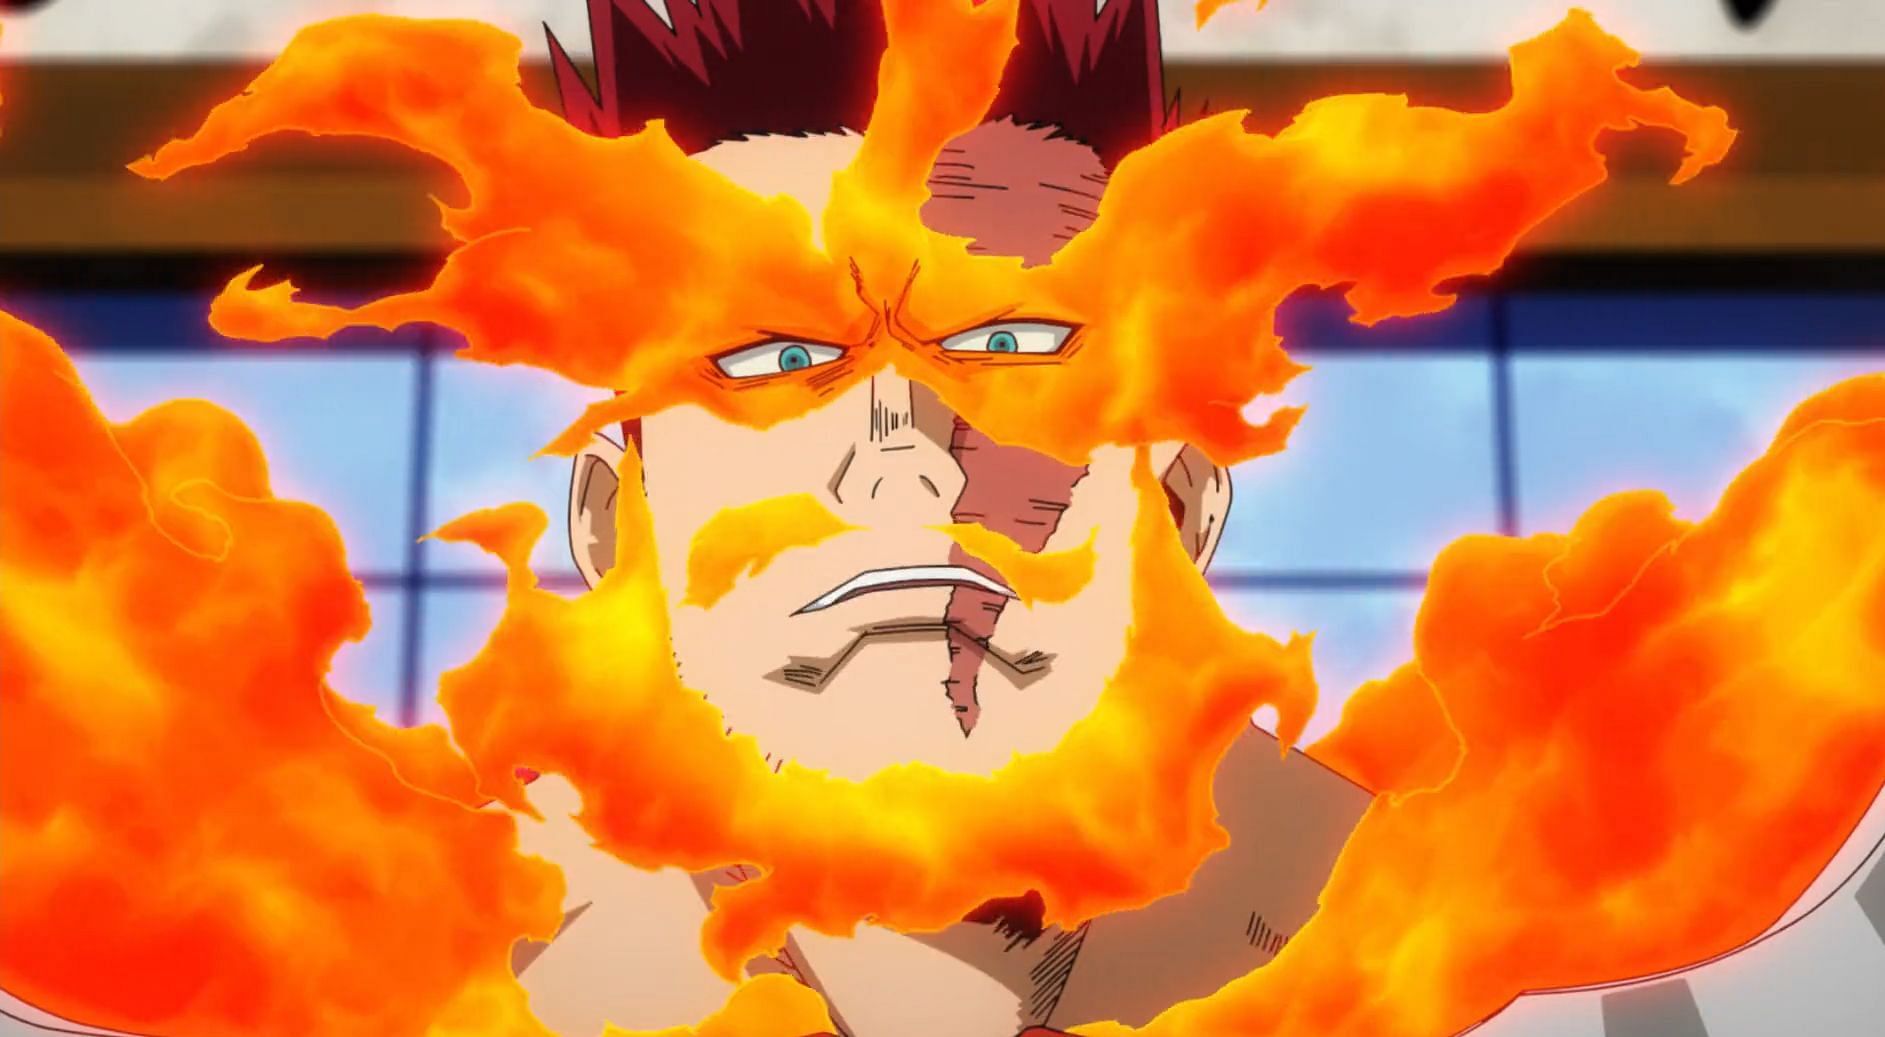 The most insignificant My Hero Academia arc proves Endeavor could